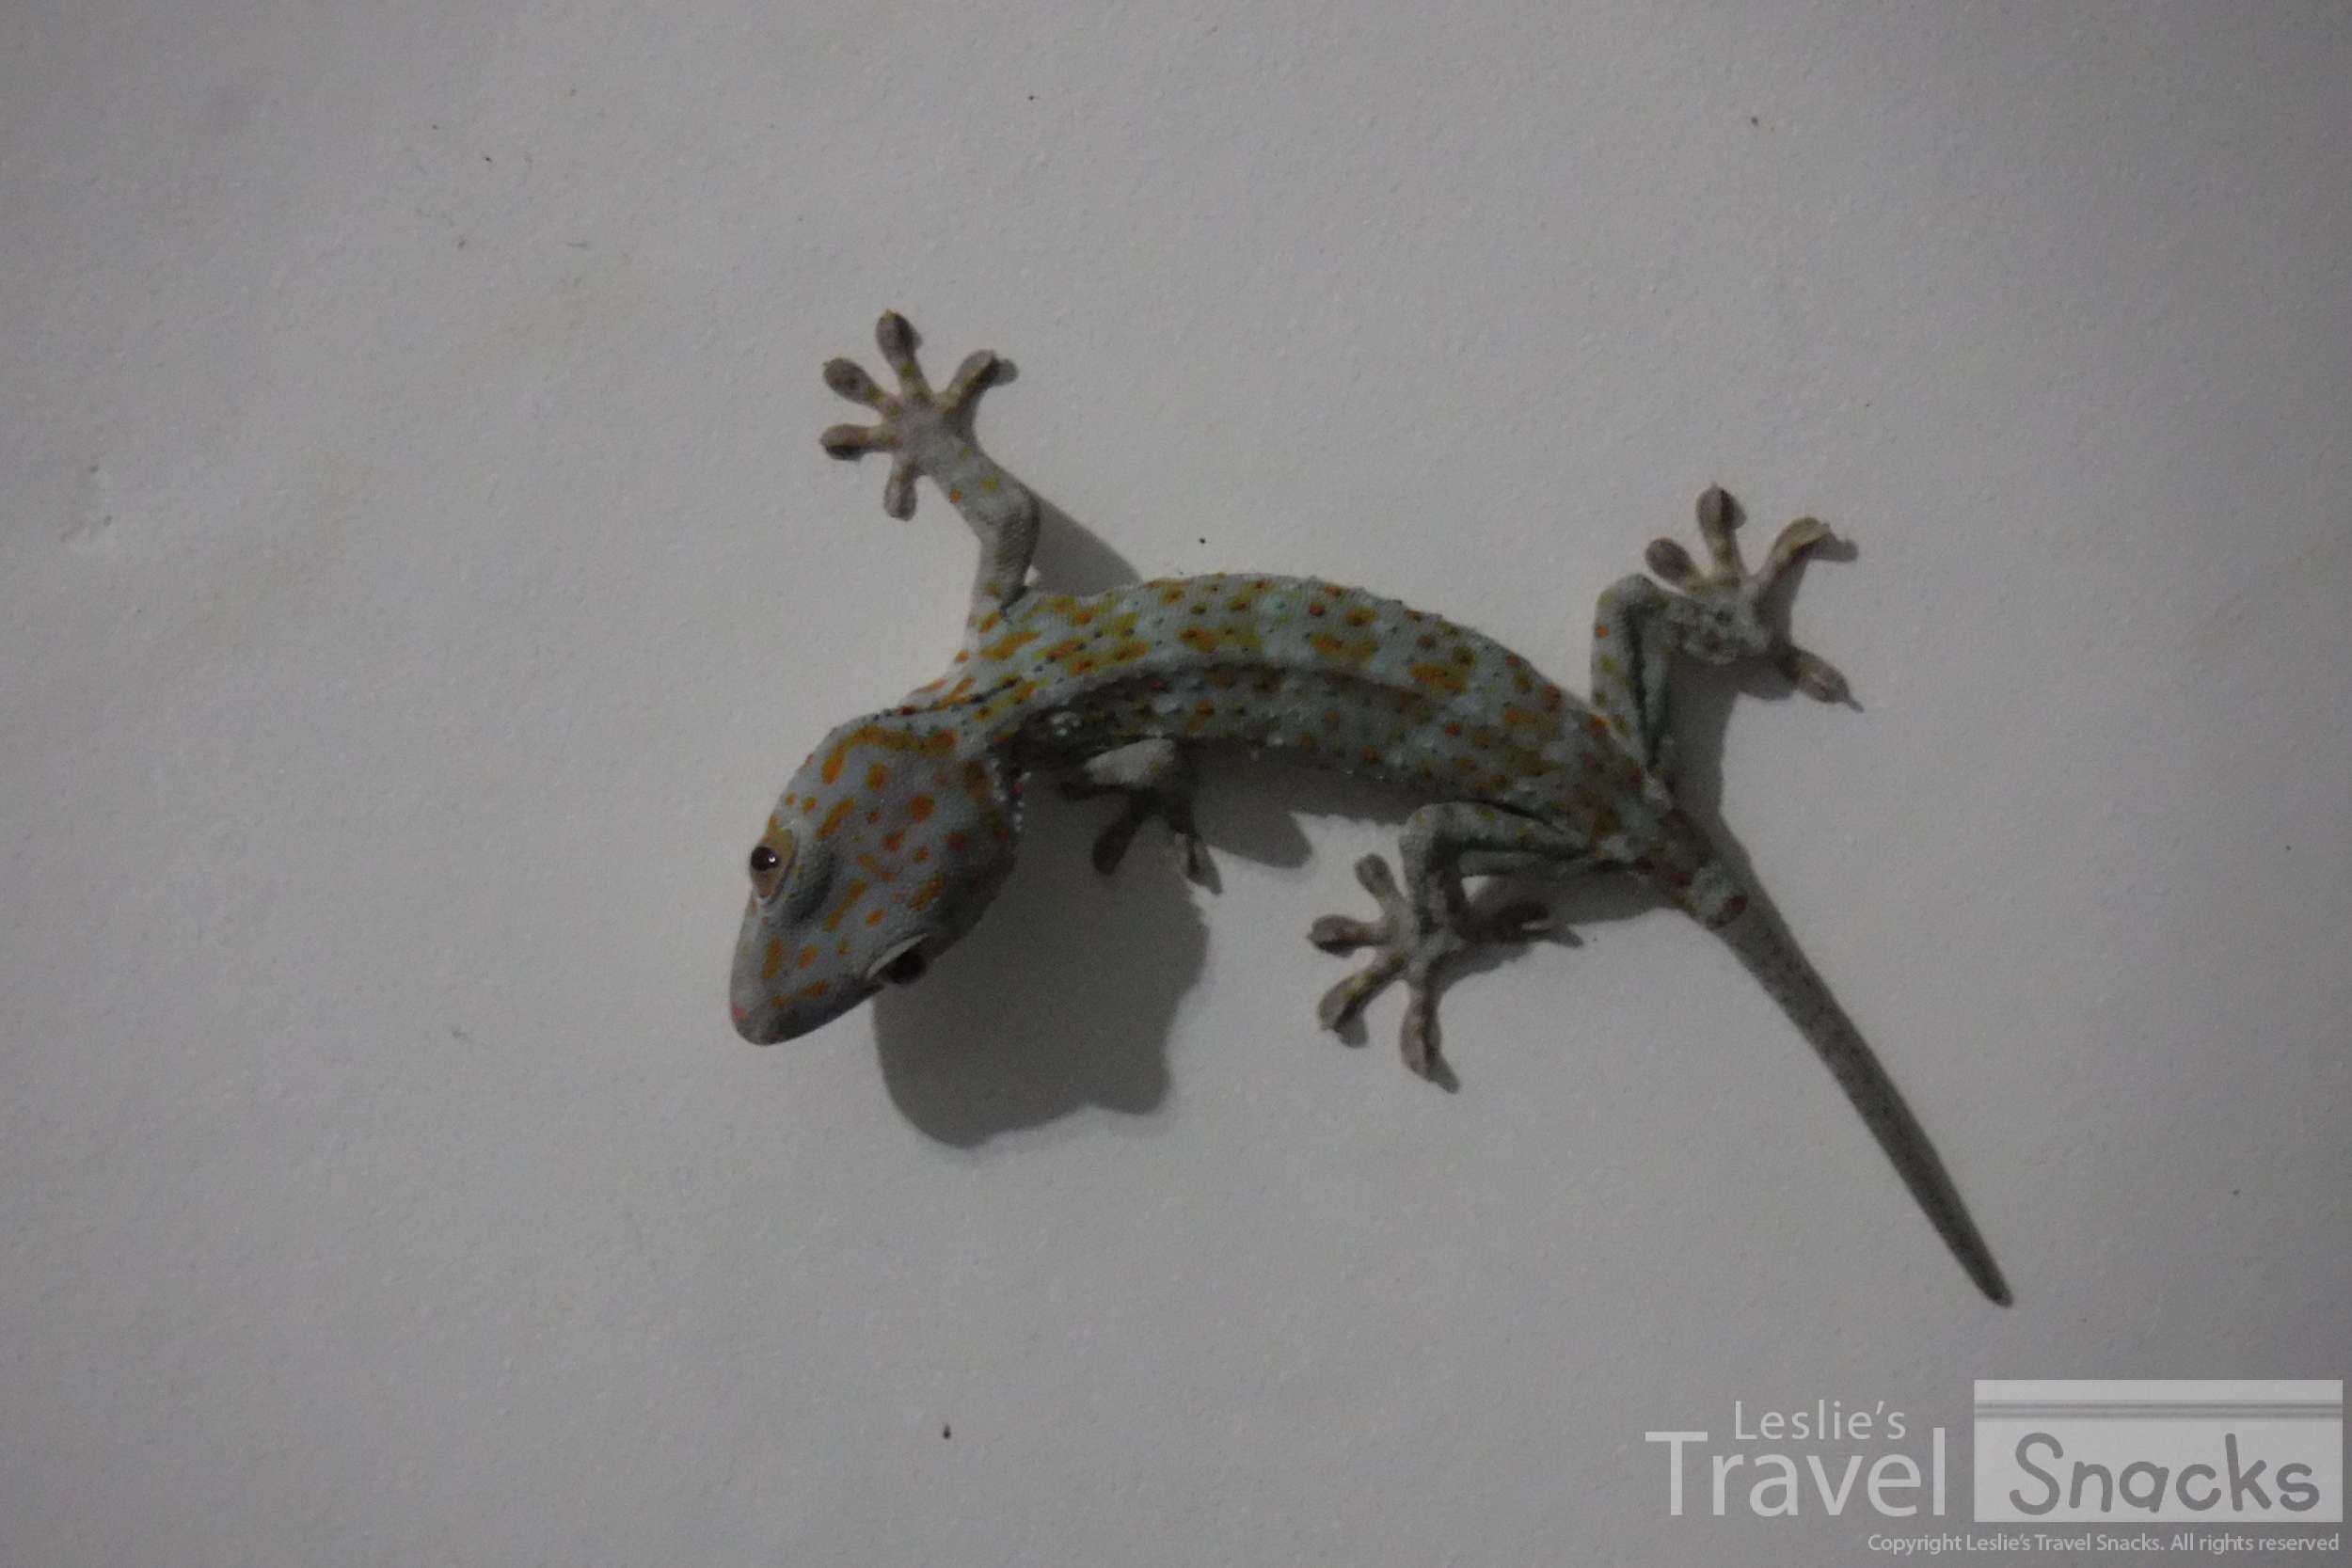 Tokay lizard - they are very loud at night!